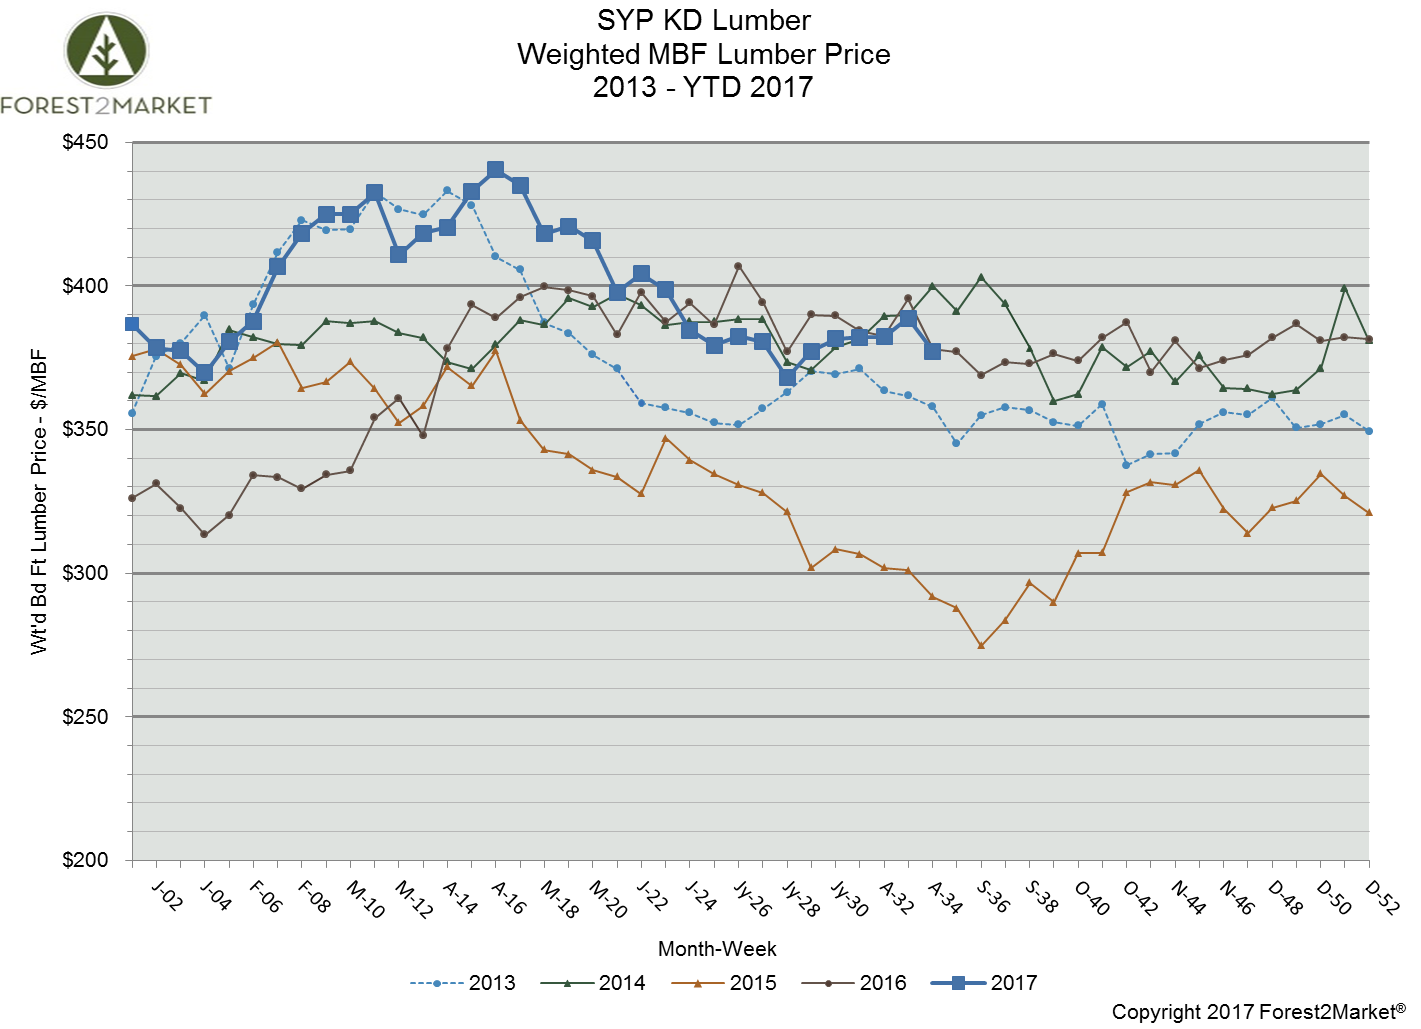 Southern Yellow Pine Lumber Prices Remain Flat in August